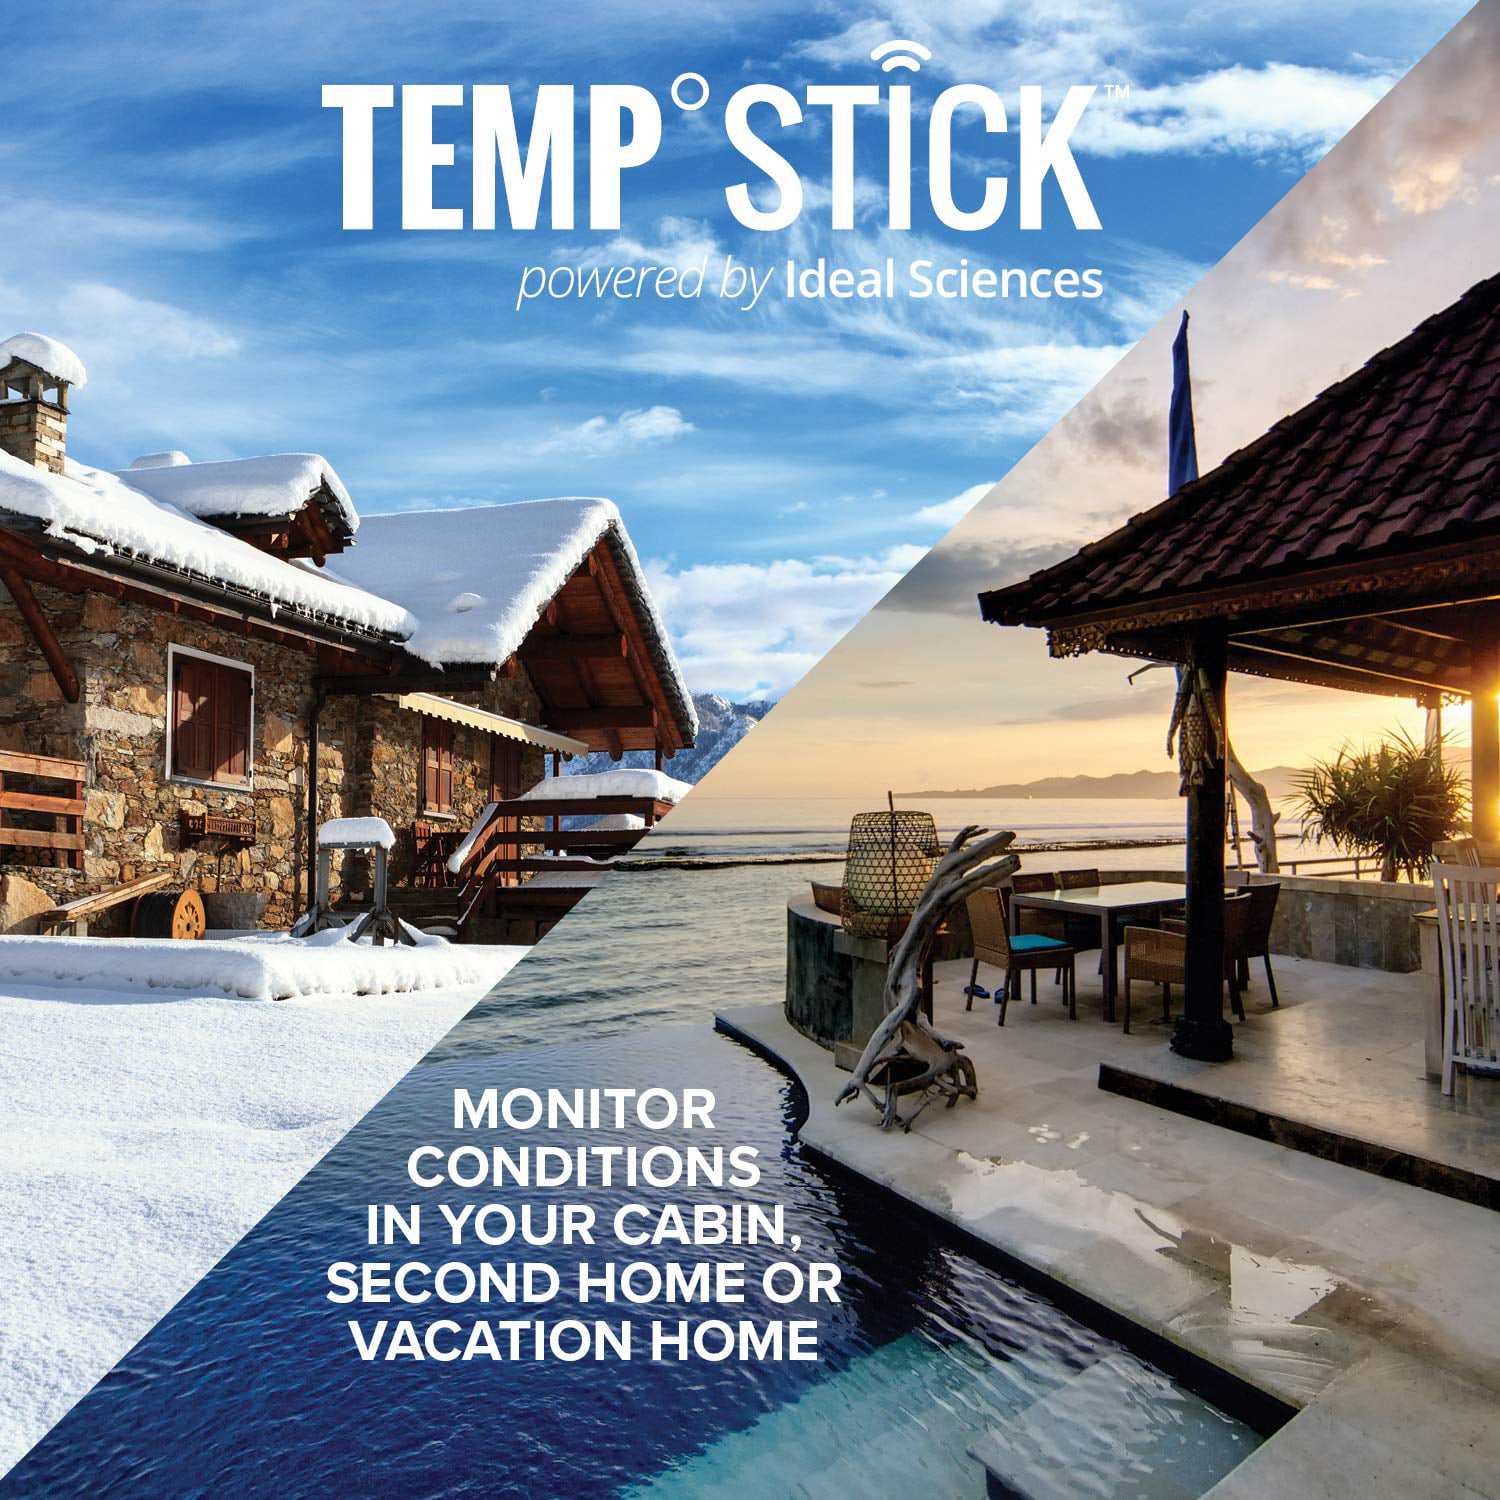 Temp Stick Remote WiFi Temperature & Humidity Sensor. No Subscription. 24/7  Monitor, Unlimited Text, Push & Email Alerts. Free Apps, Made in America.